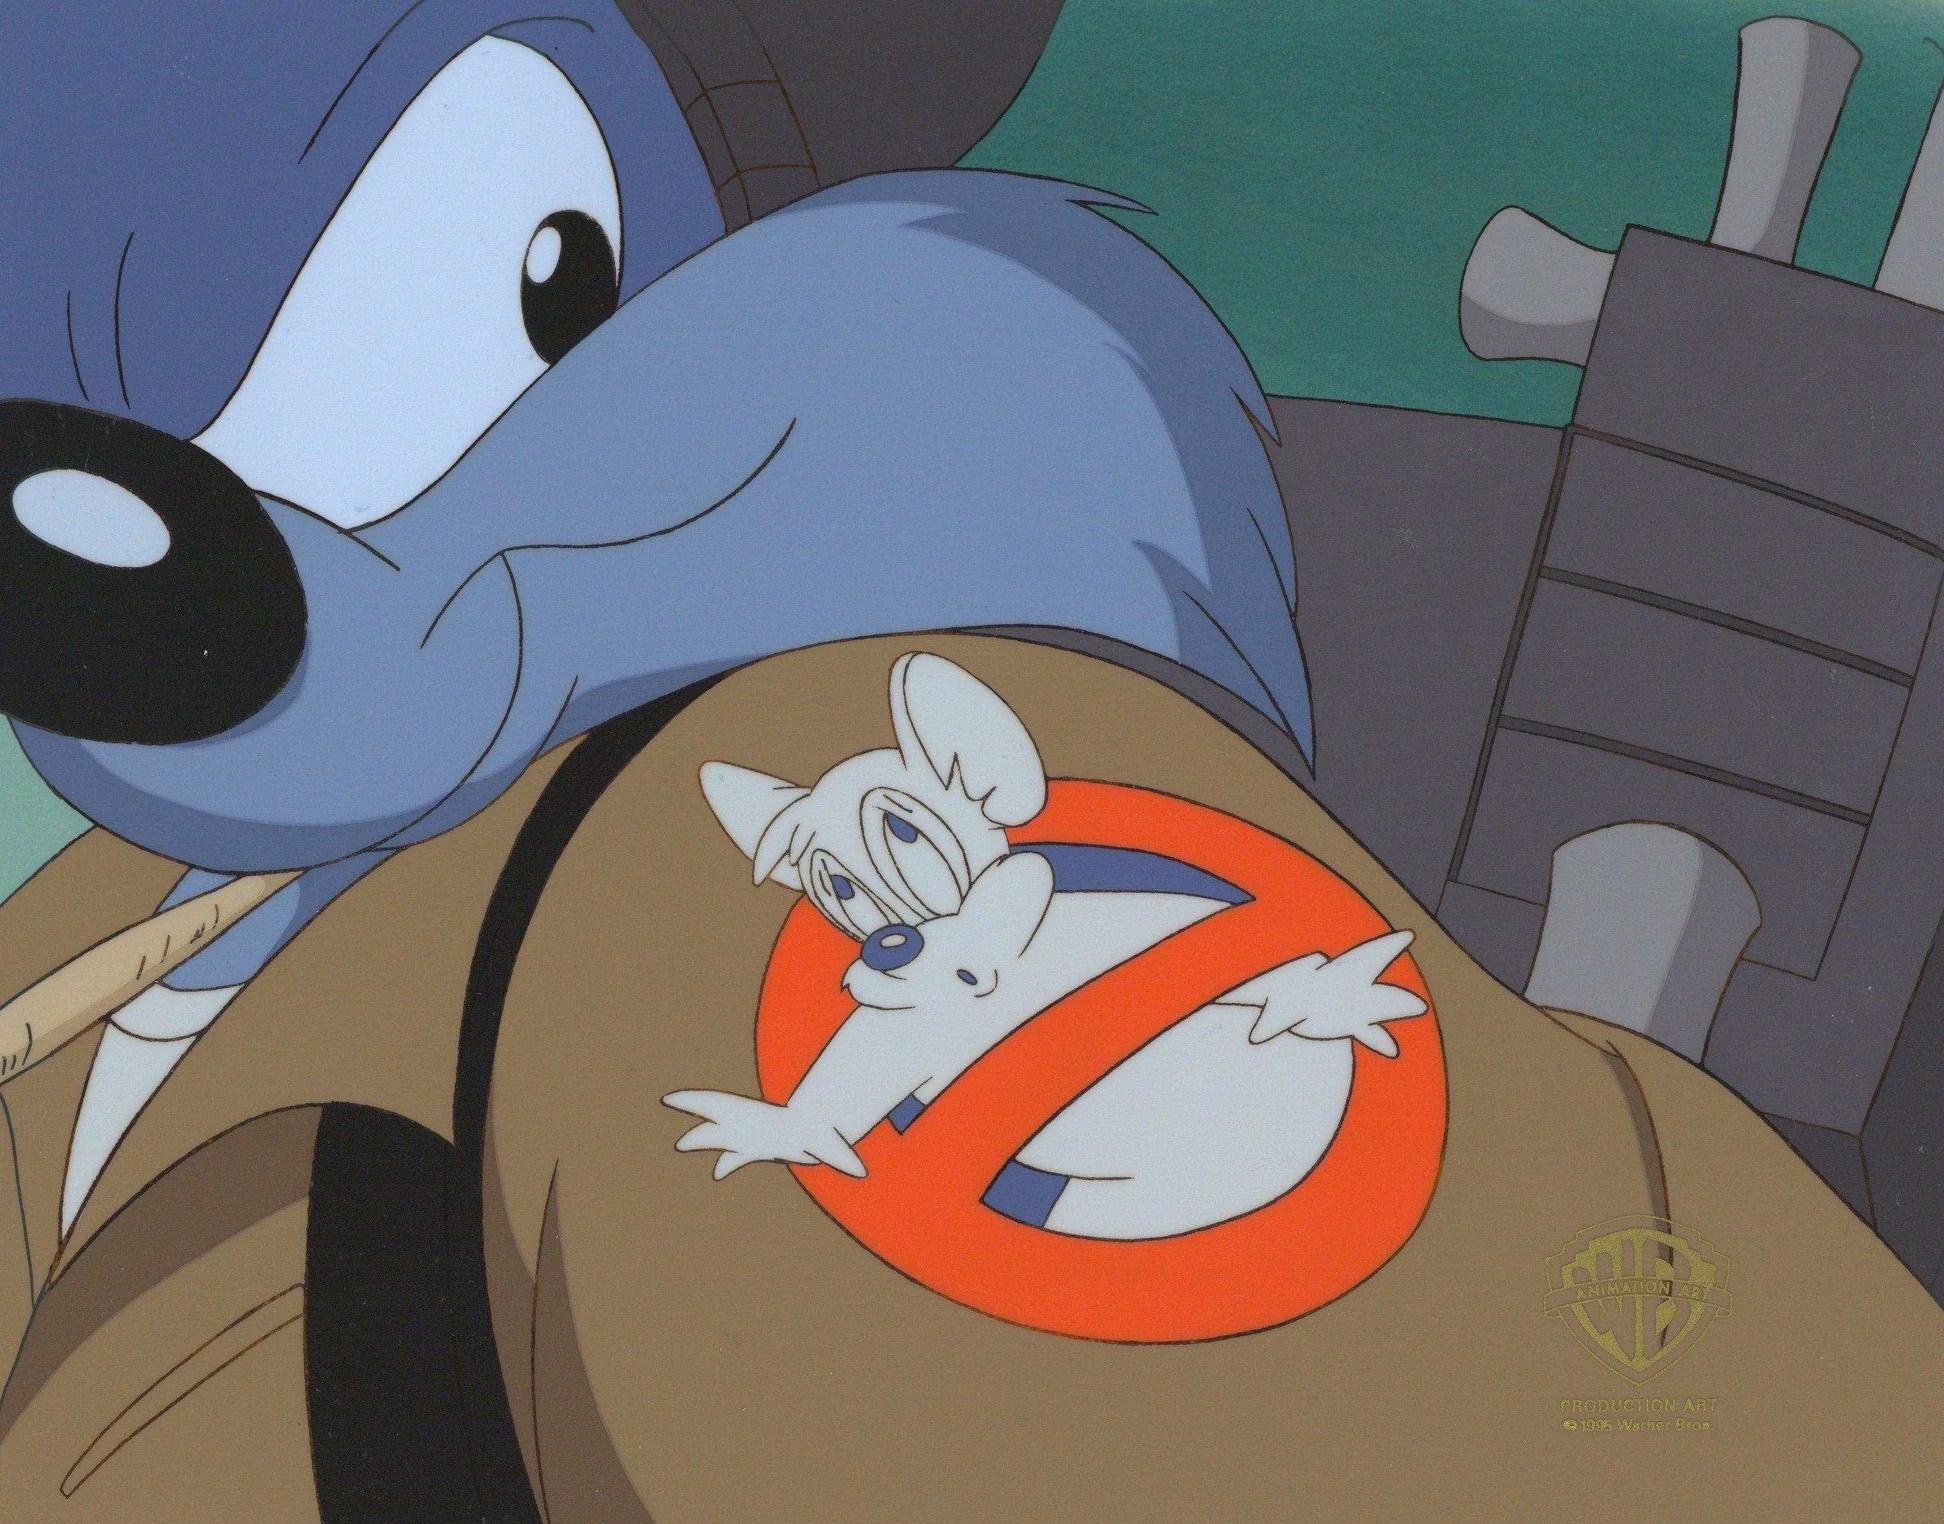 Tiny Toons Original Production Cel: Furball and Sneezer the Sneezing Ghost - Art by Warner Bros. Studio Artists